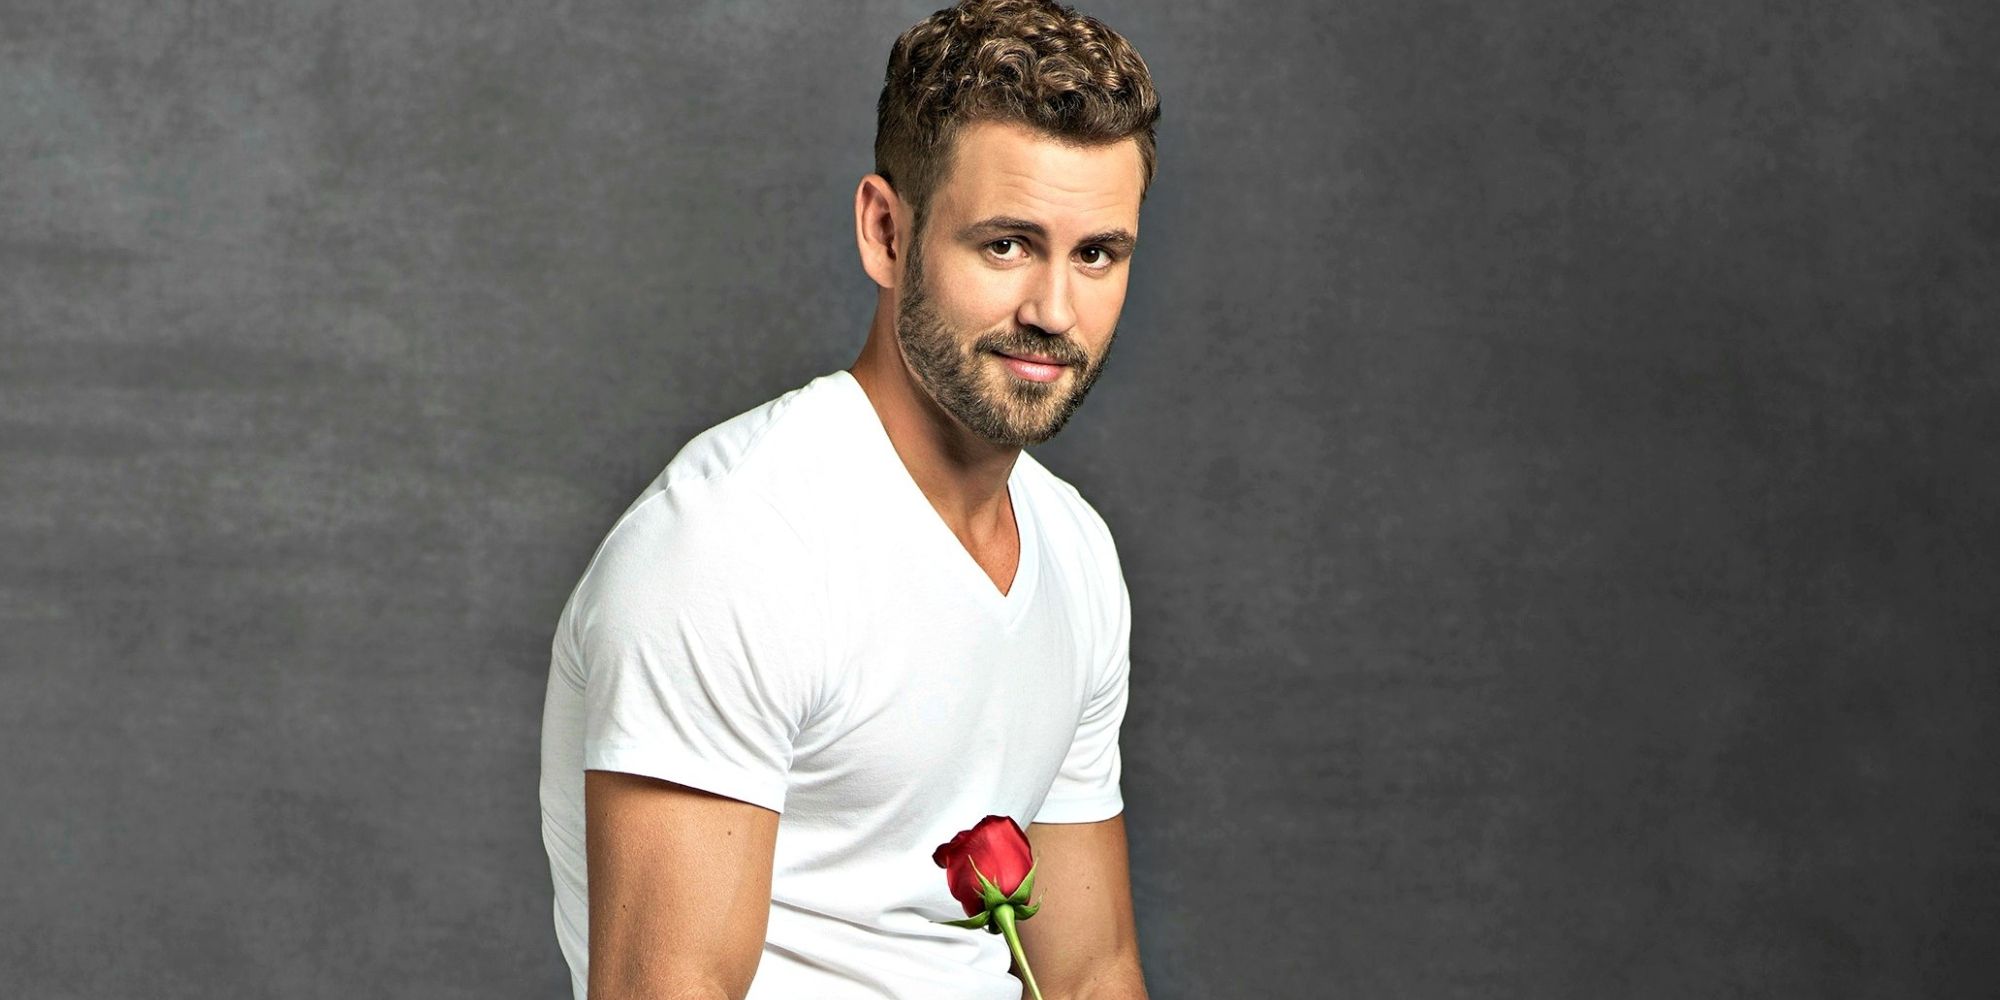 Nick Viall from The Bachelor holding a rose